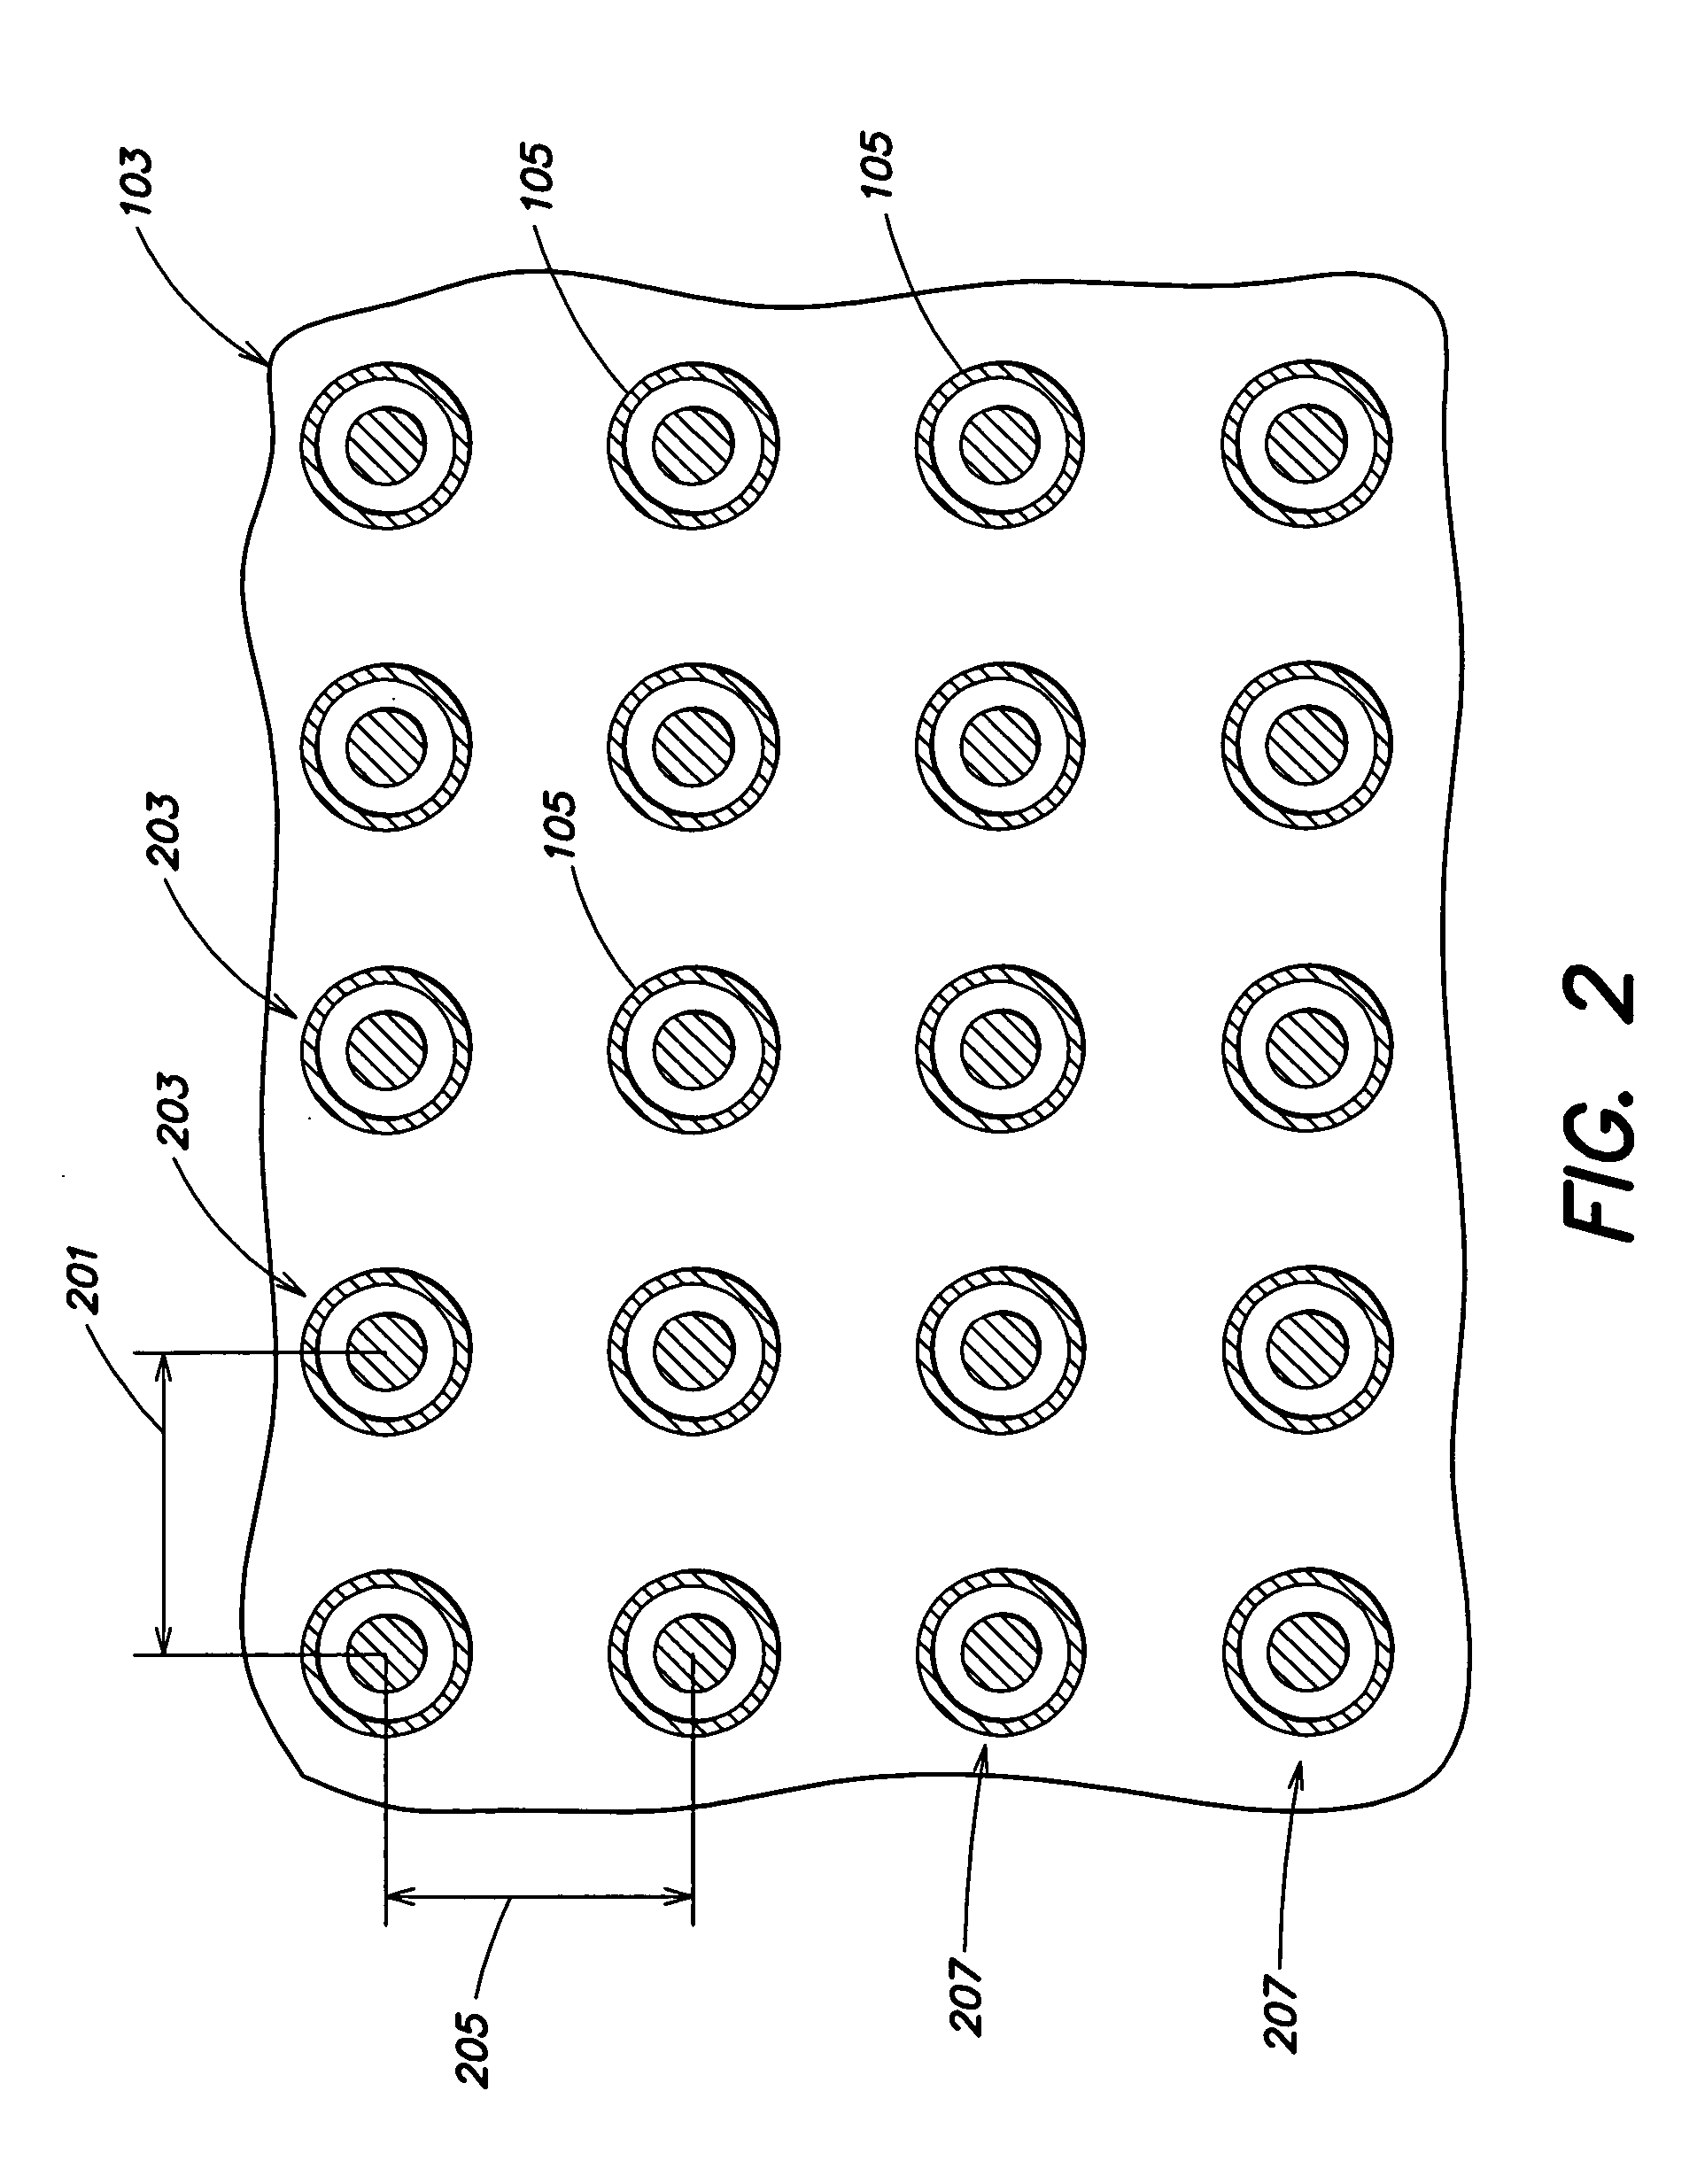 Methods and apparatus for transferring conductive pieces during semiconductor device fabrication